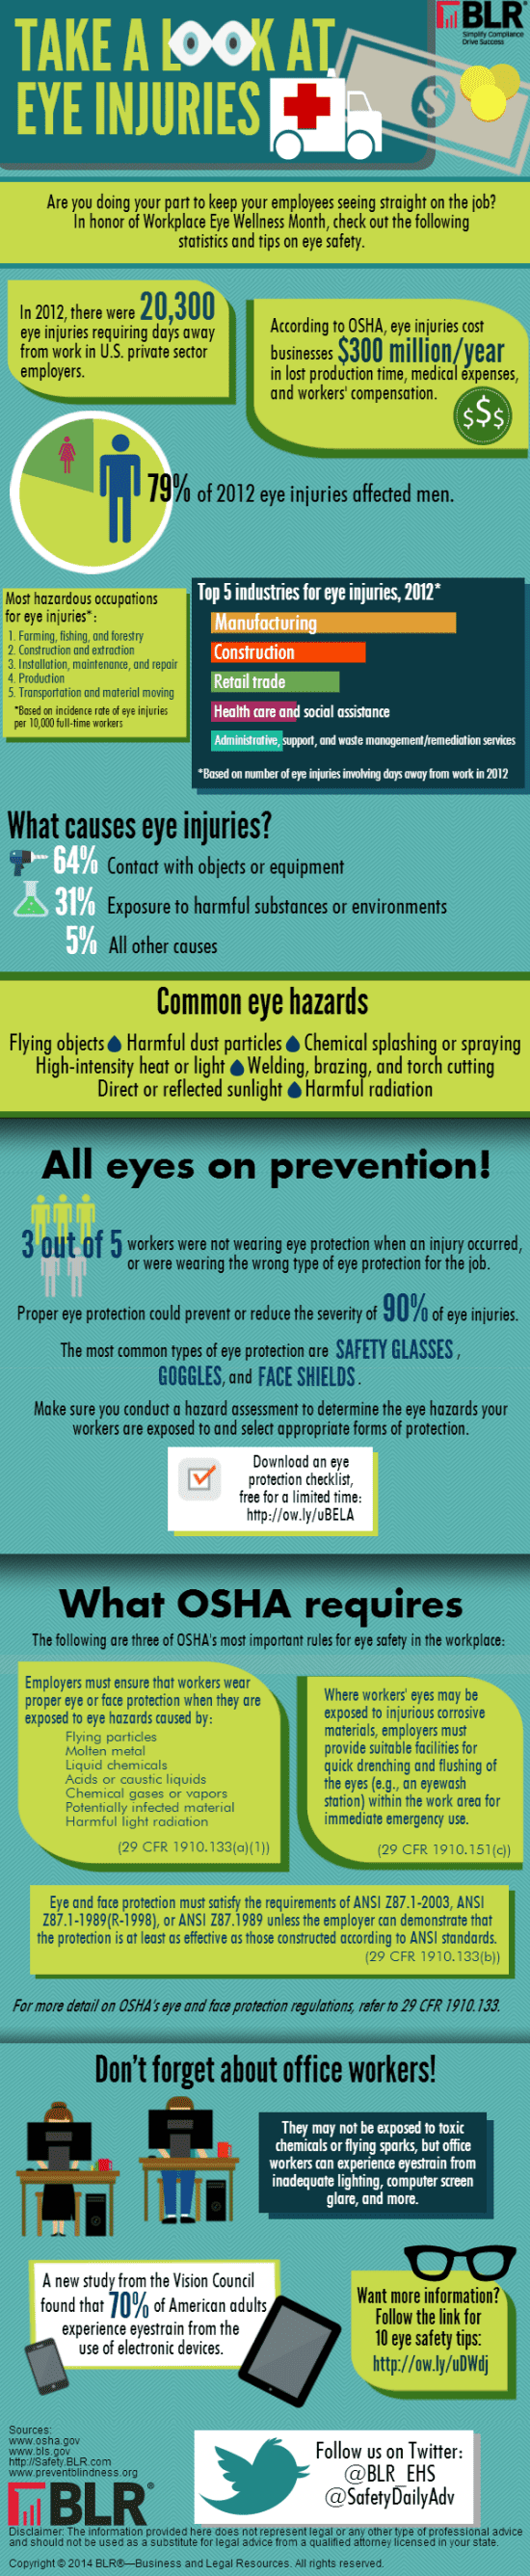 Construction safety - Eye injury causes and prevention